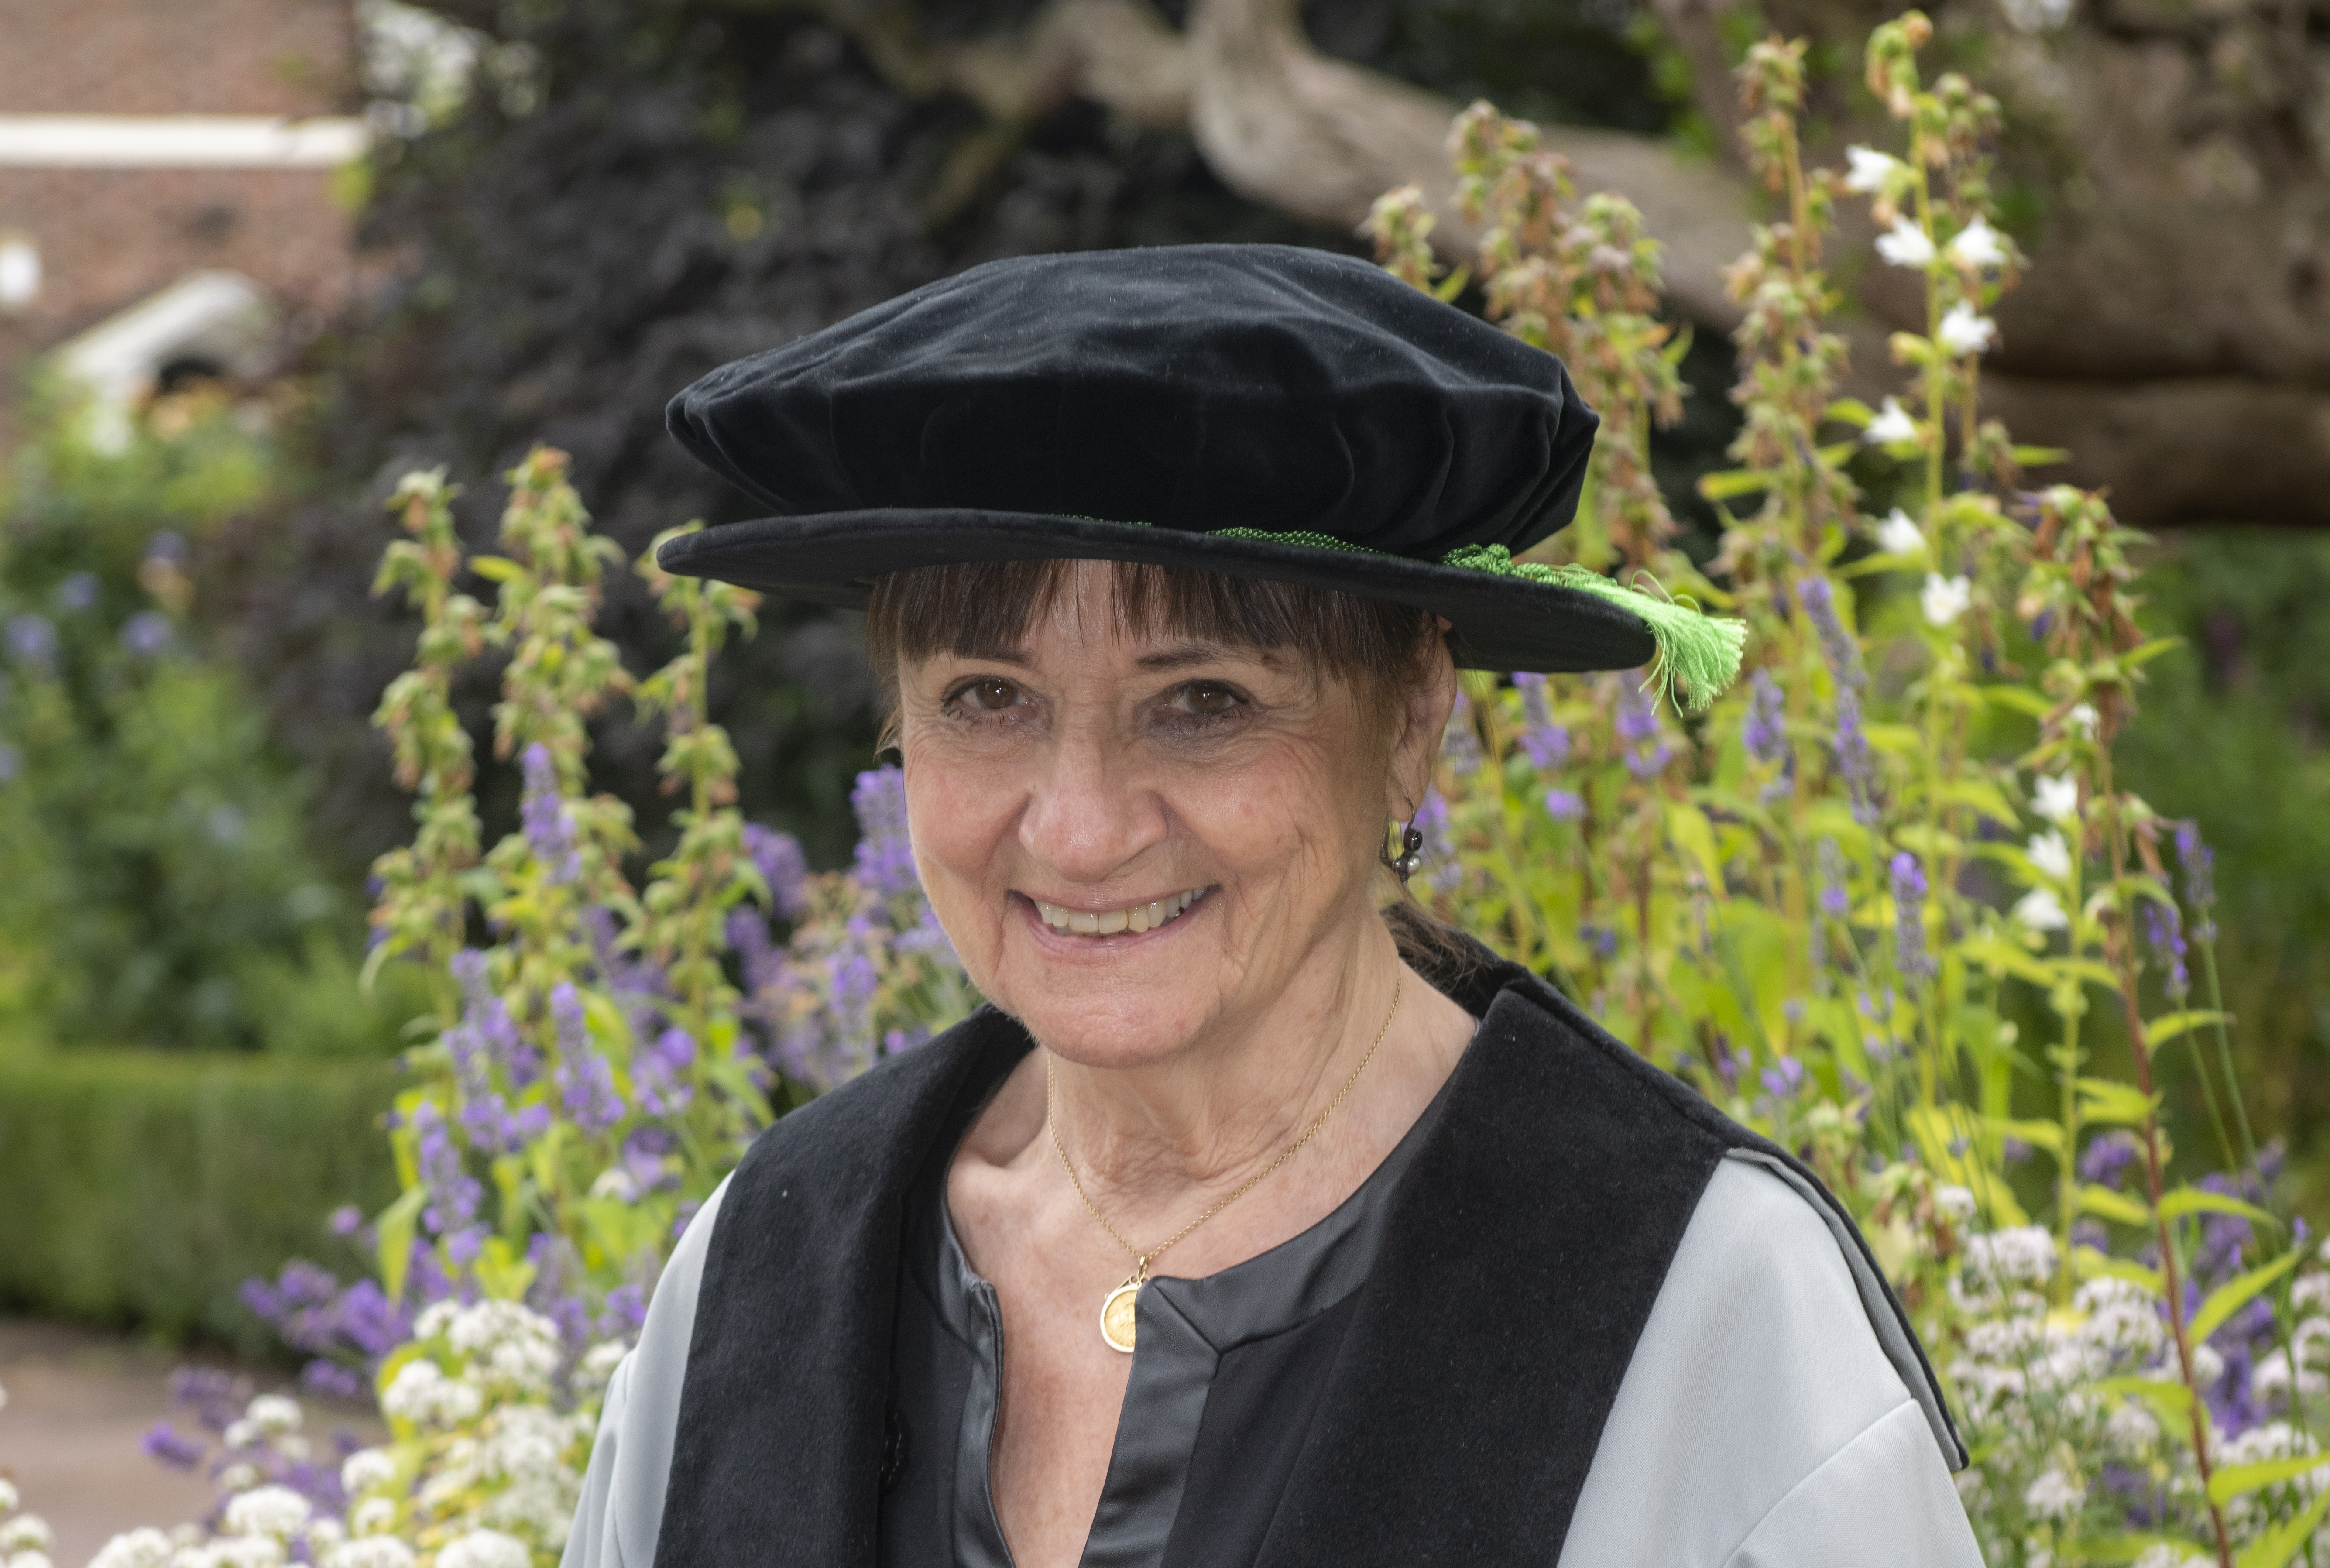 Julie Staun OBE was awarded an honorary fellowship